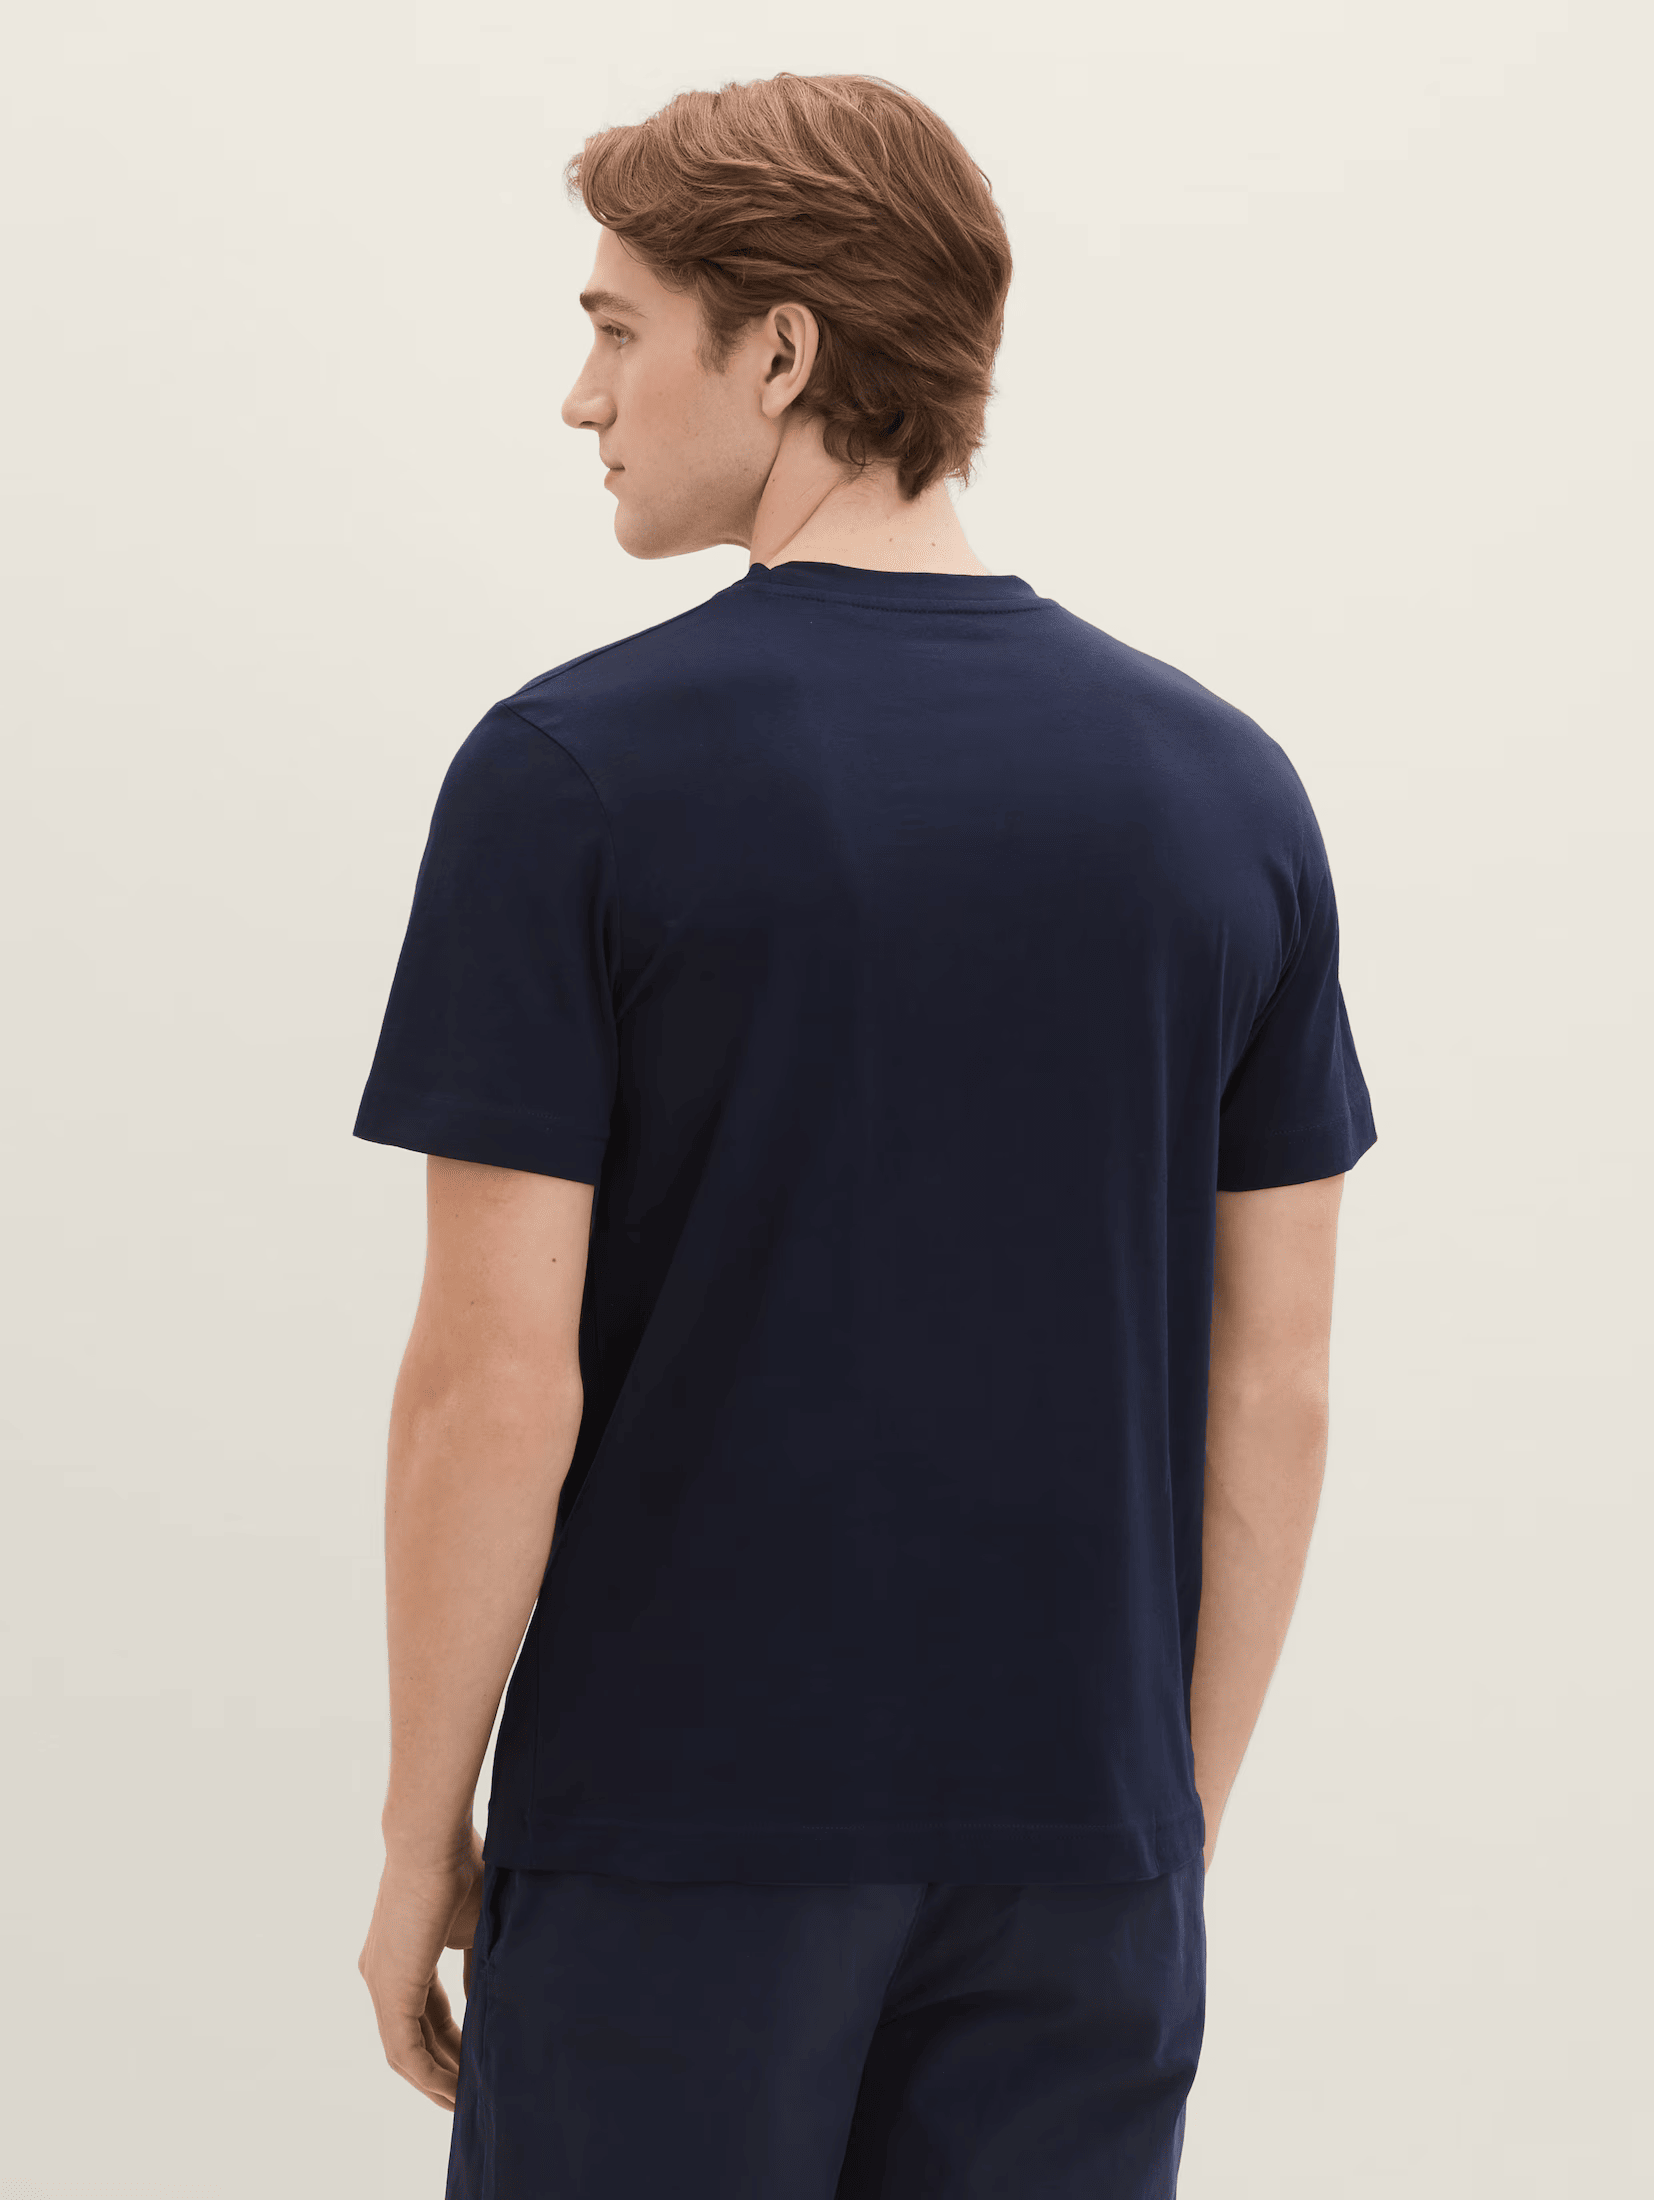 Tom Tailor Navy T-shirt With A Print